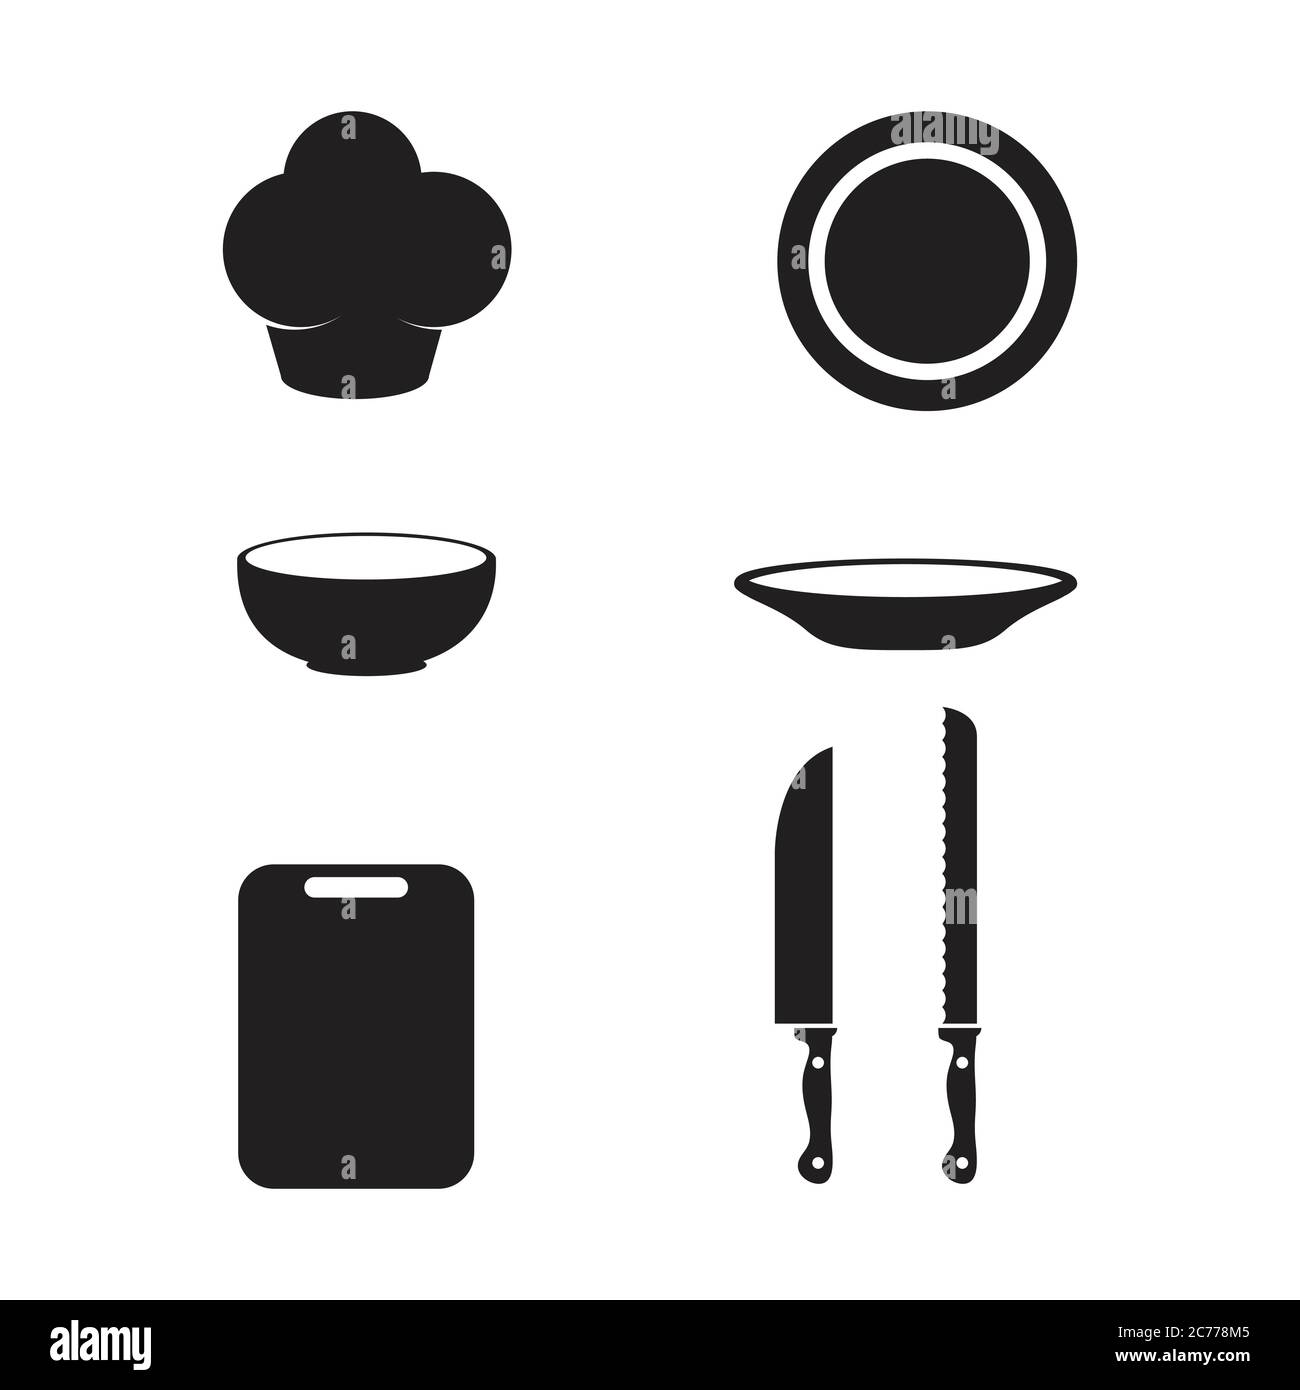 Cooking icon template vector illustration design Stock Vector